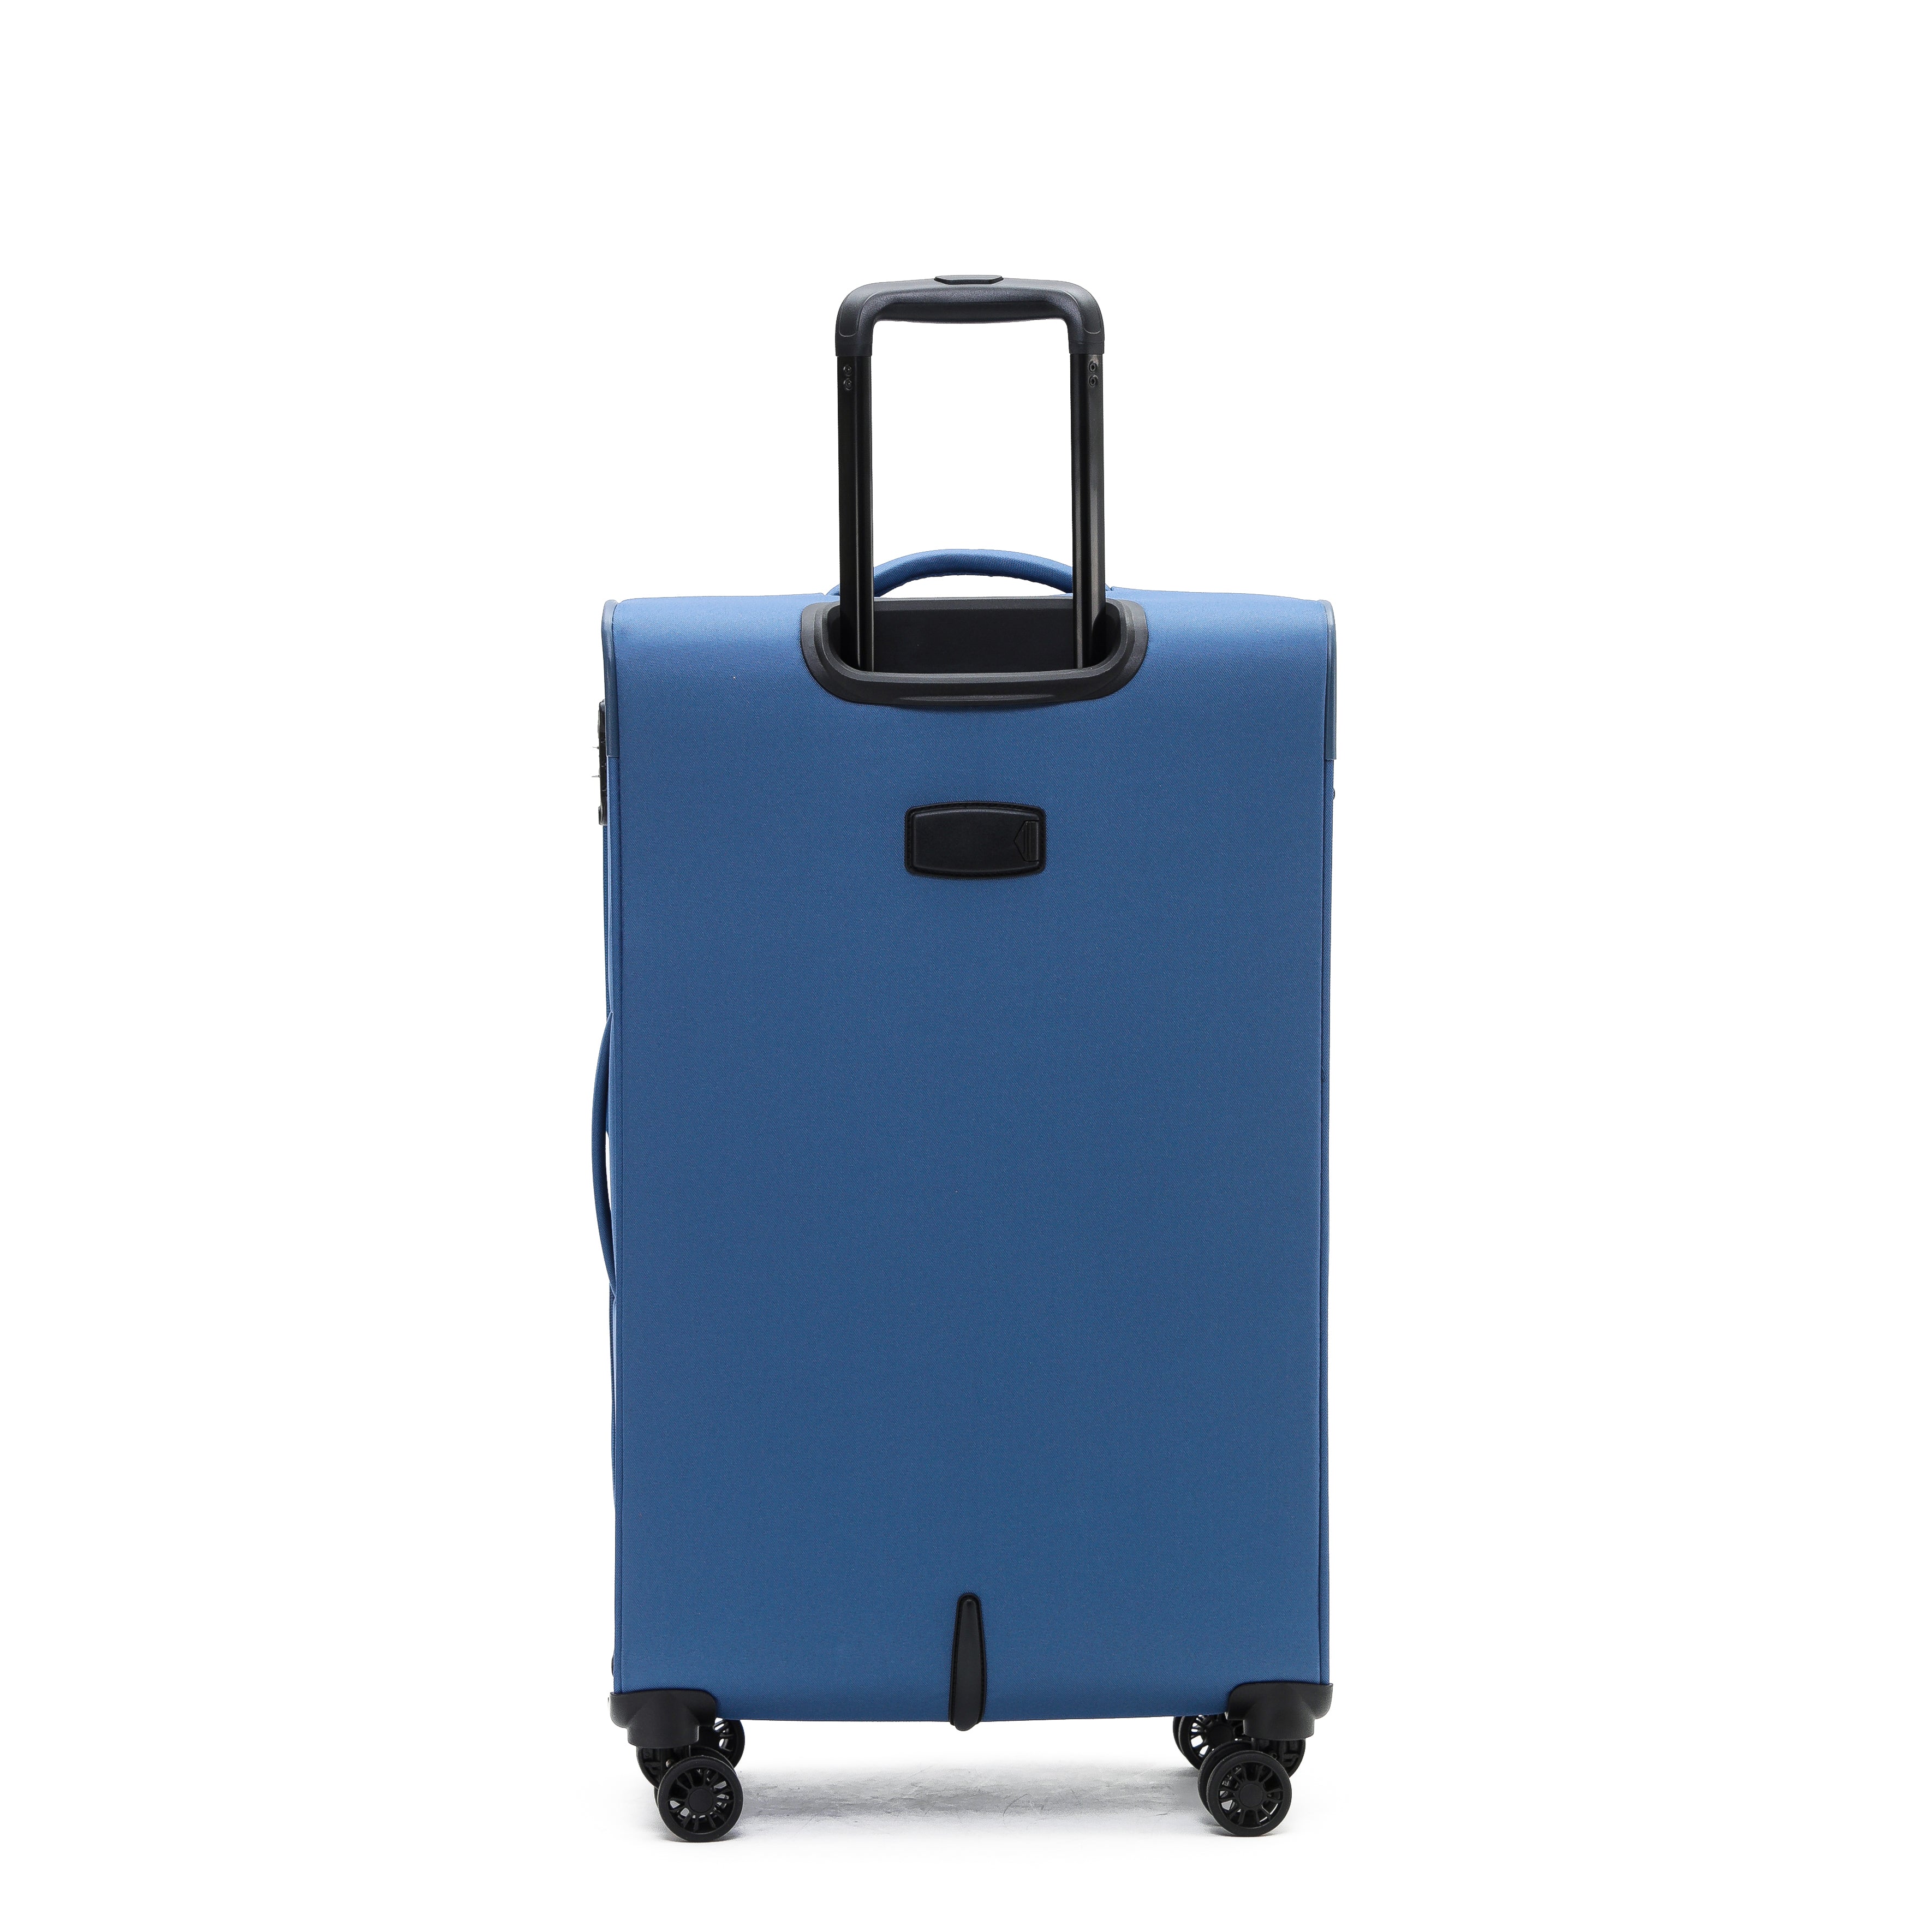 Tosca - Aviator 2.0 set of 3 suitcases (L-M-S) - Blue-5